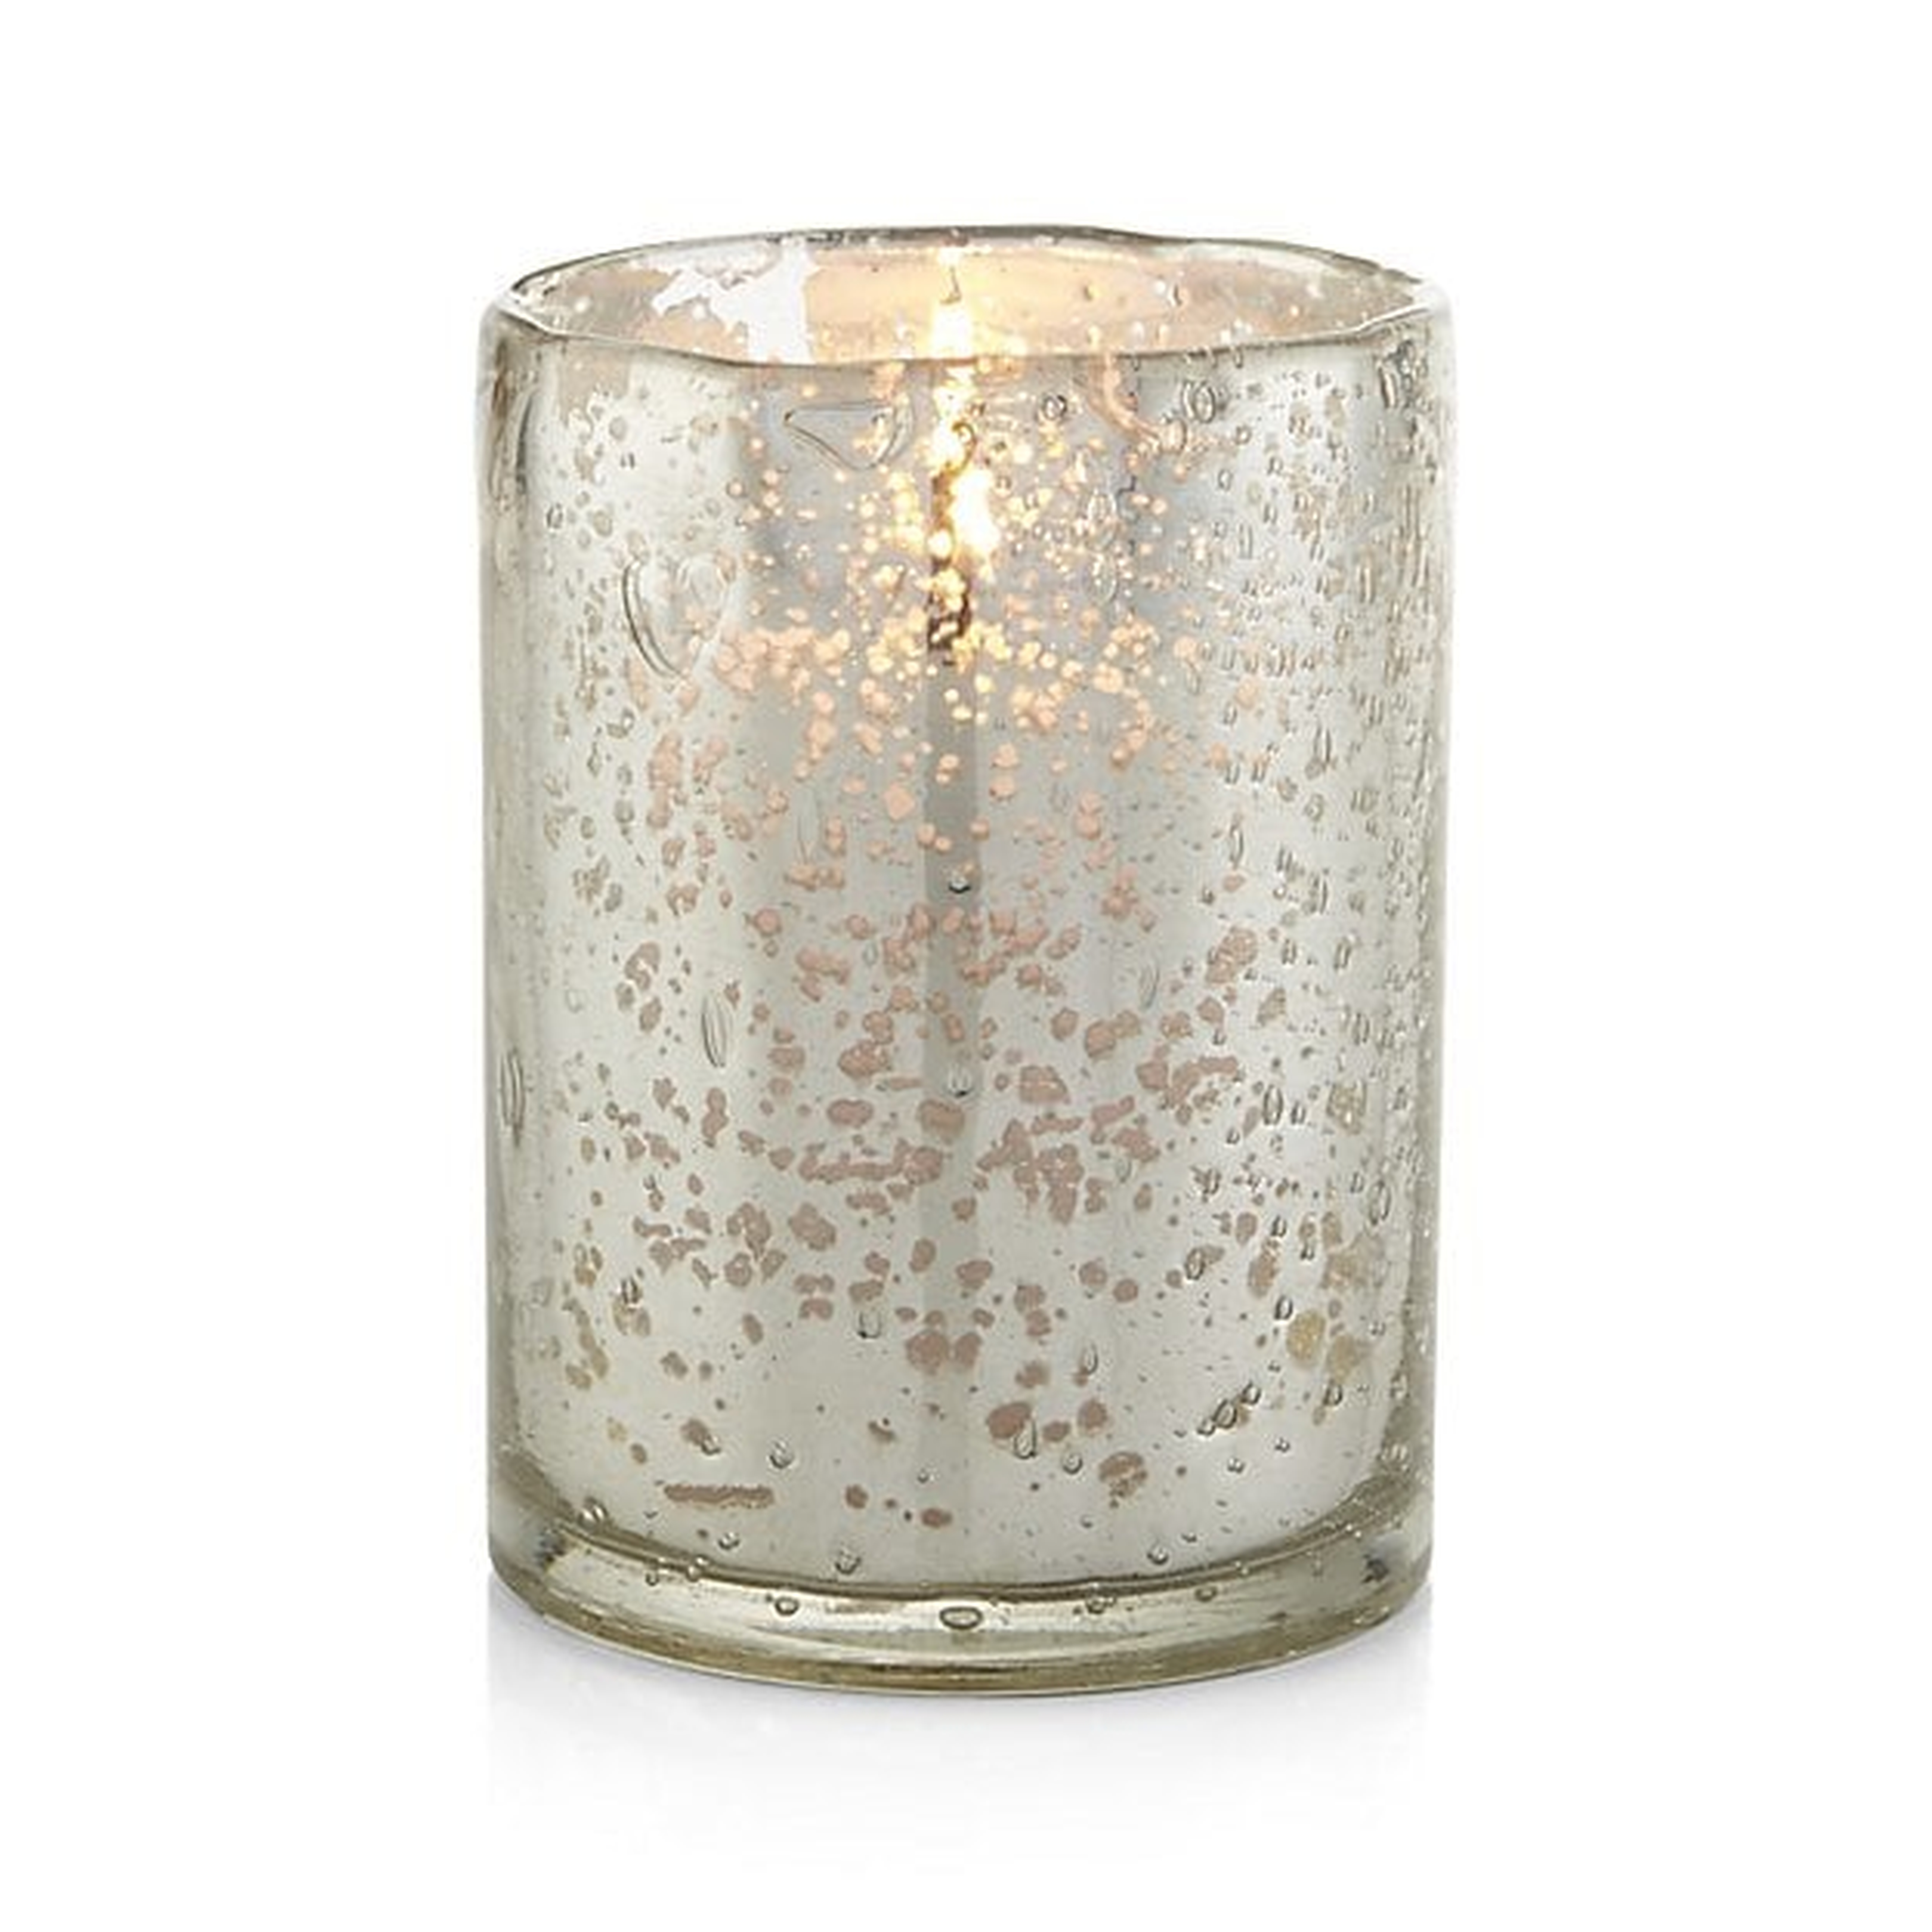 Bubbled Silver Glass Hurricane Candle Holder - Crate and Barrel